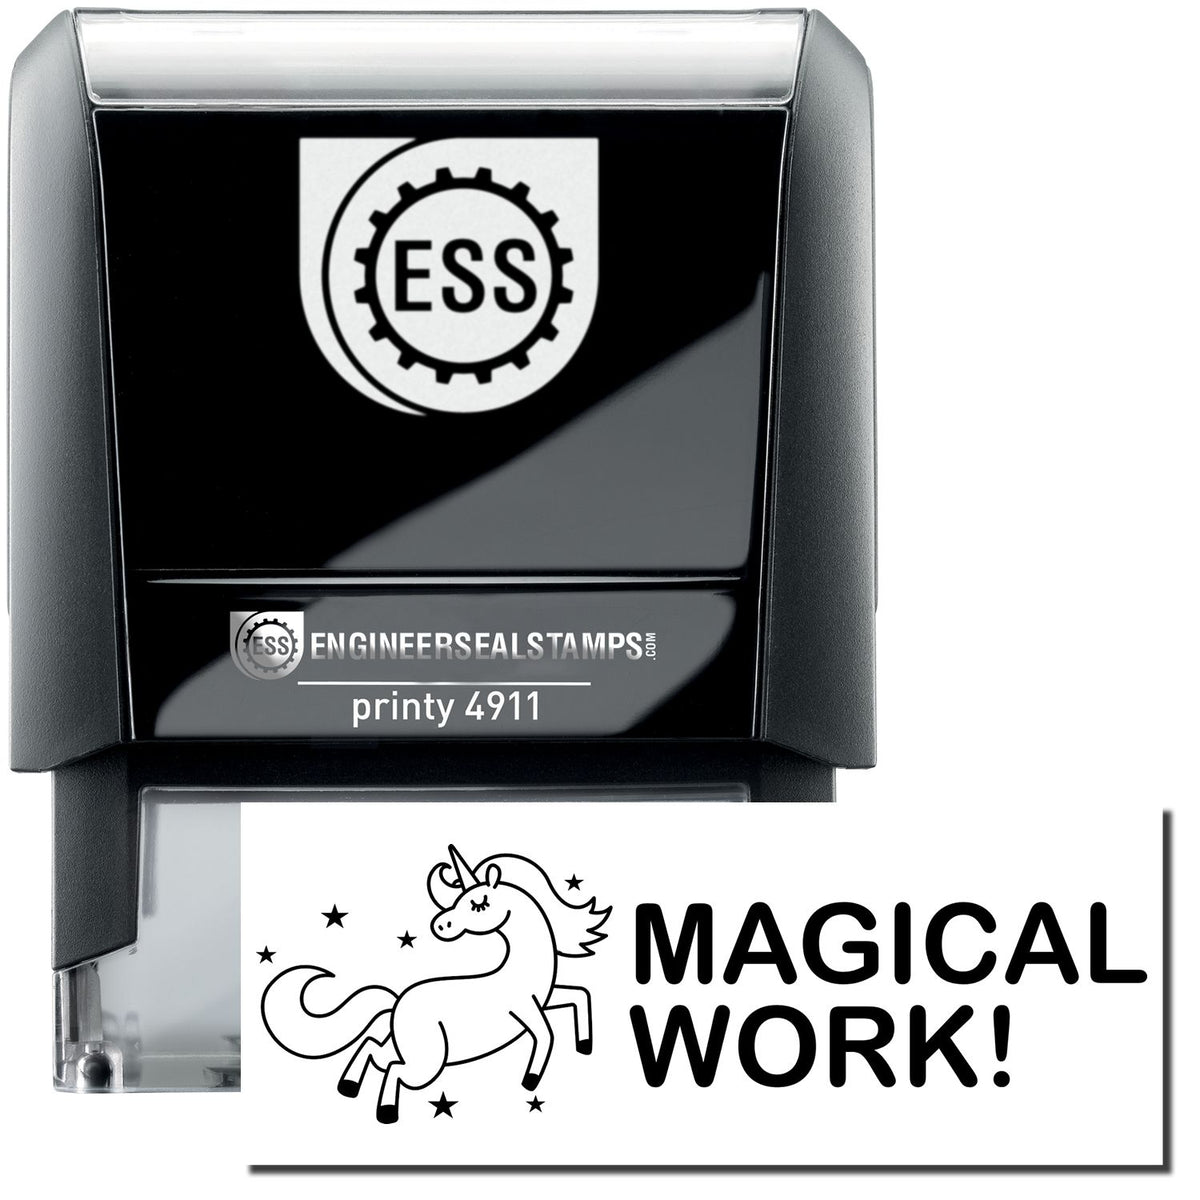 A self-inking stamp with a stamped image showing how the text &quot;MAGICAL WORK!&quot; with an image of a unicorn dancing among the stars on the left side is displayed after stamping.